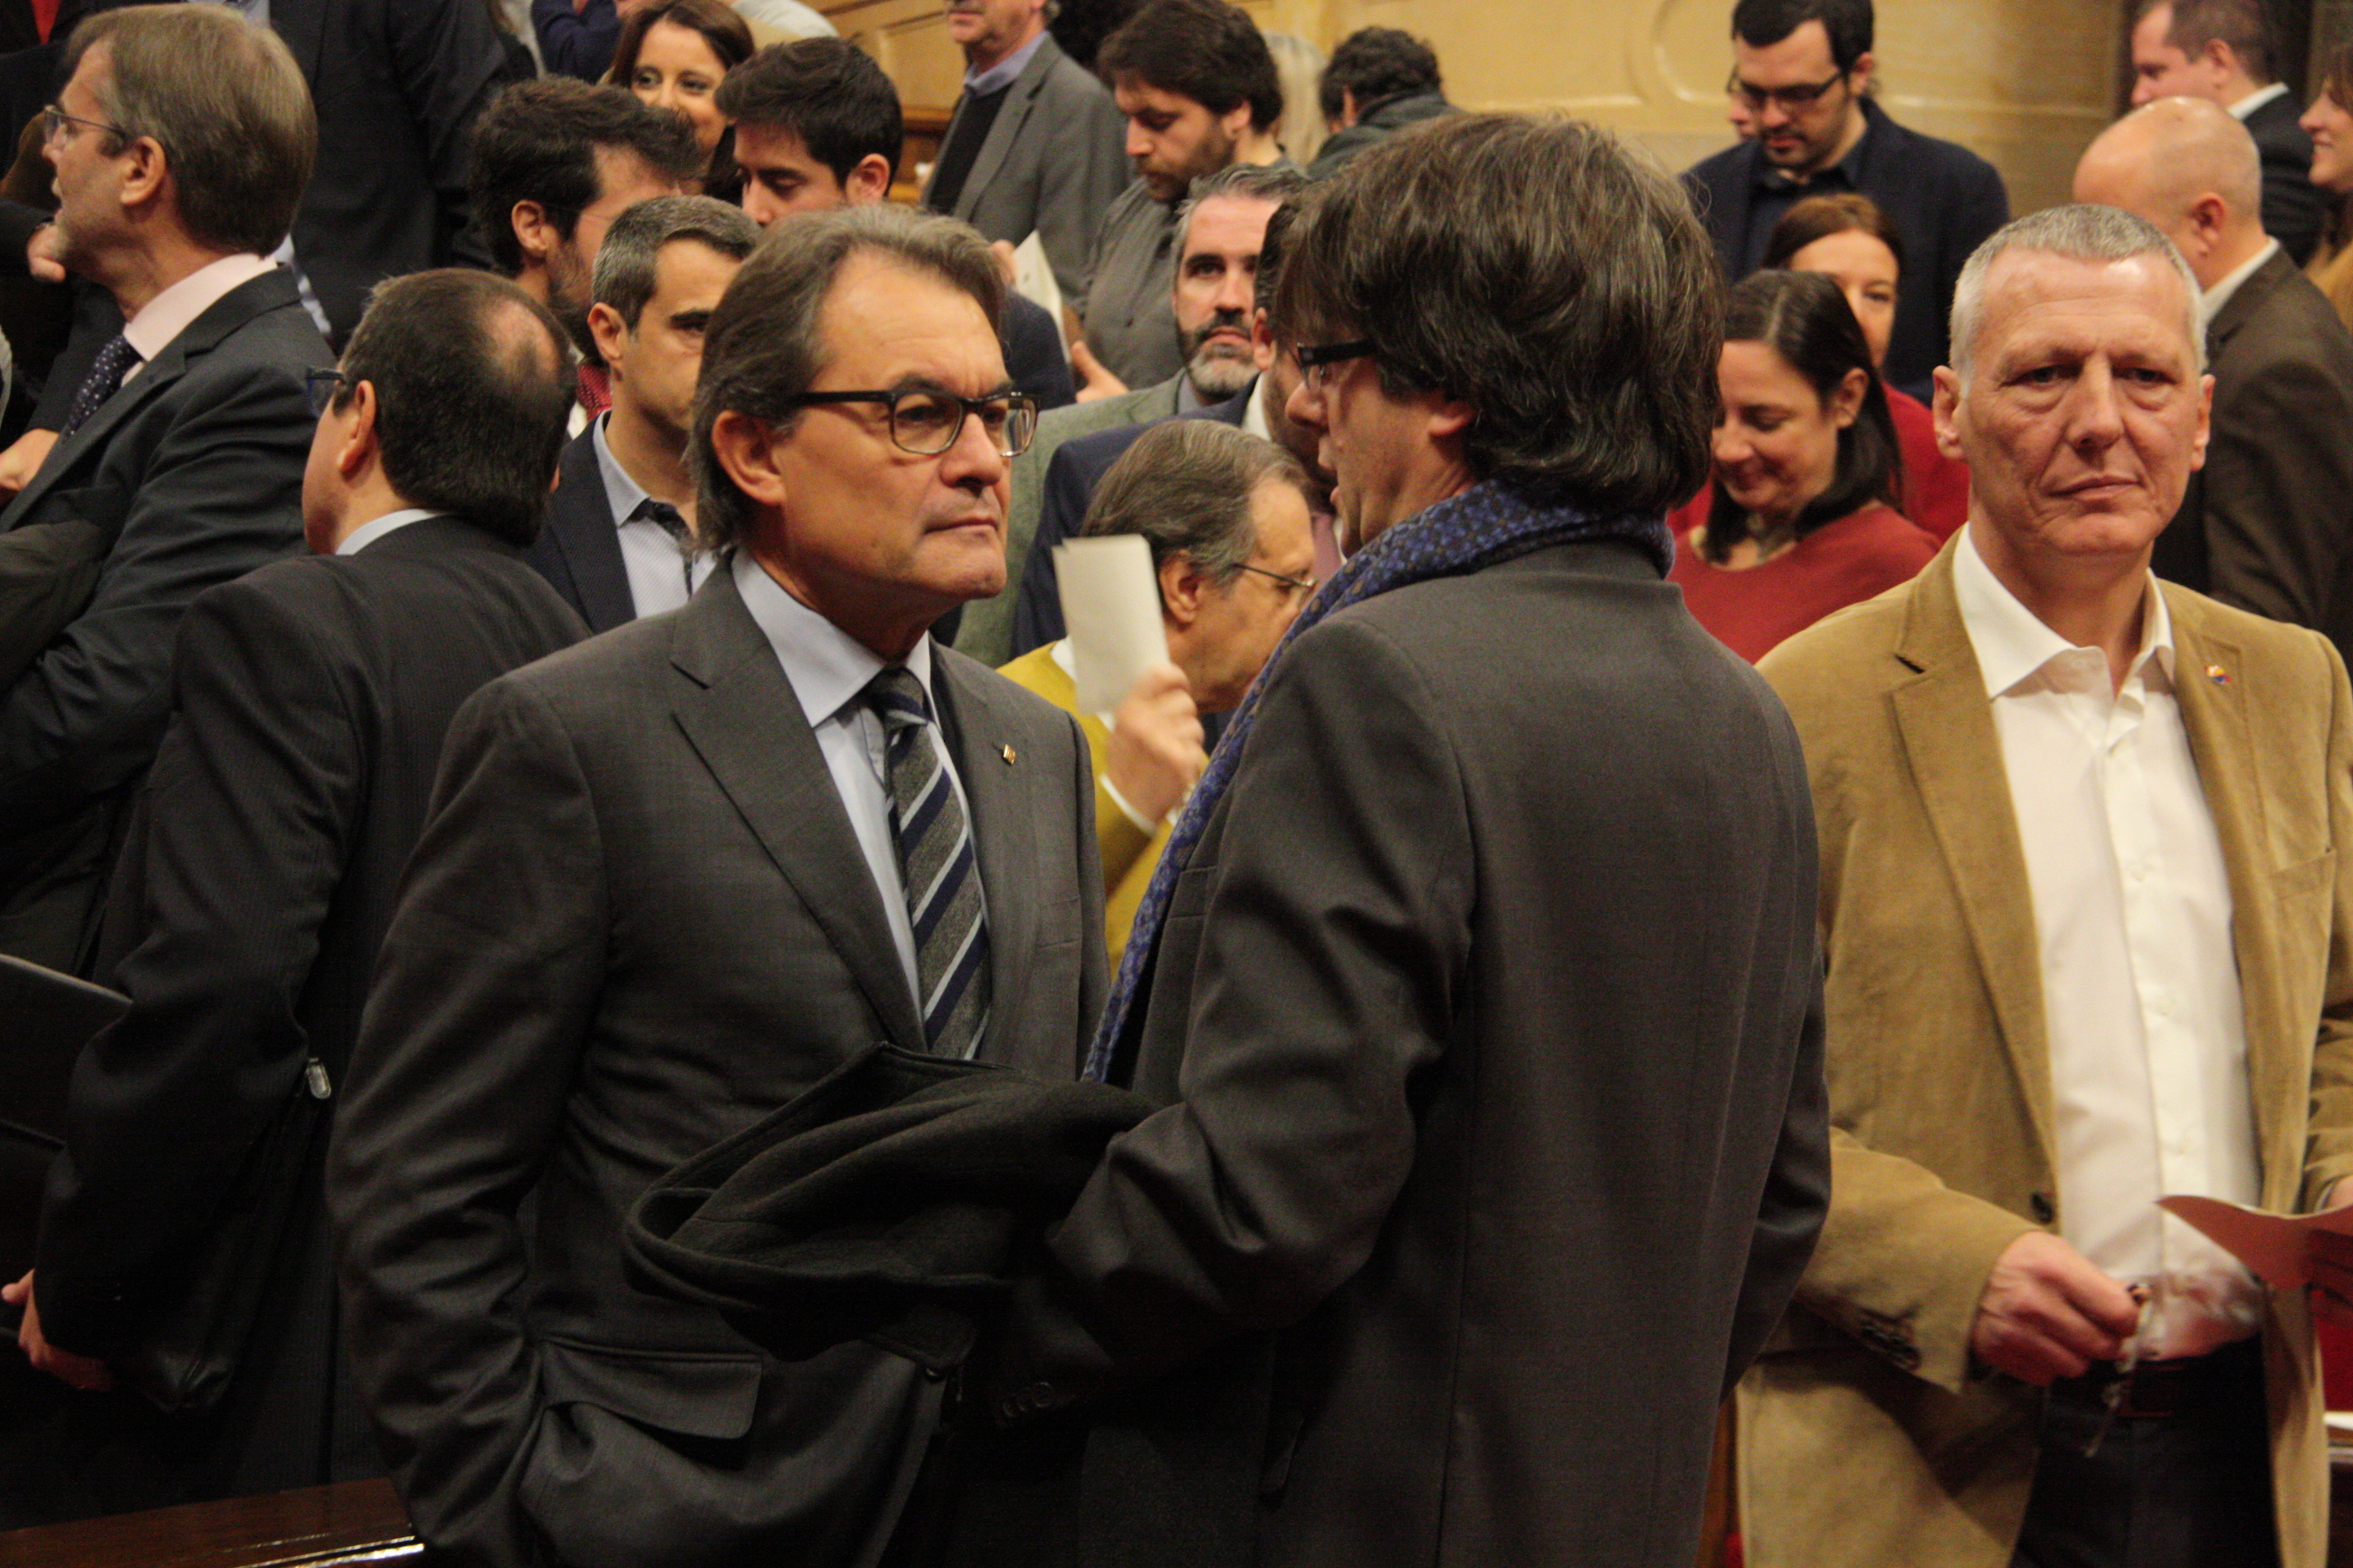 Image of current Catalan President, Artur Mas and the upcoming Catalan President and, Carles Pugidemont (by ACN)